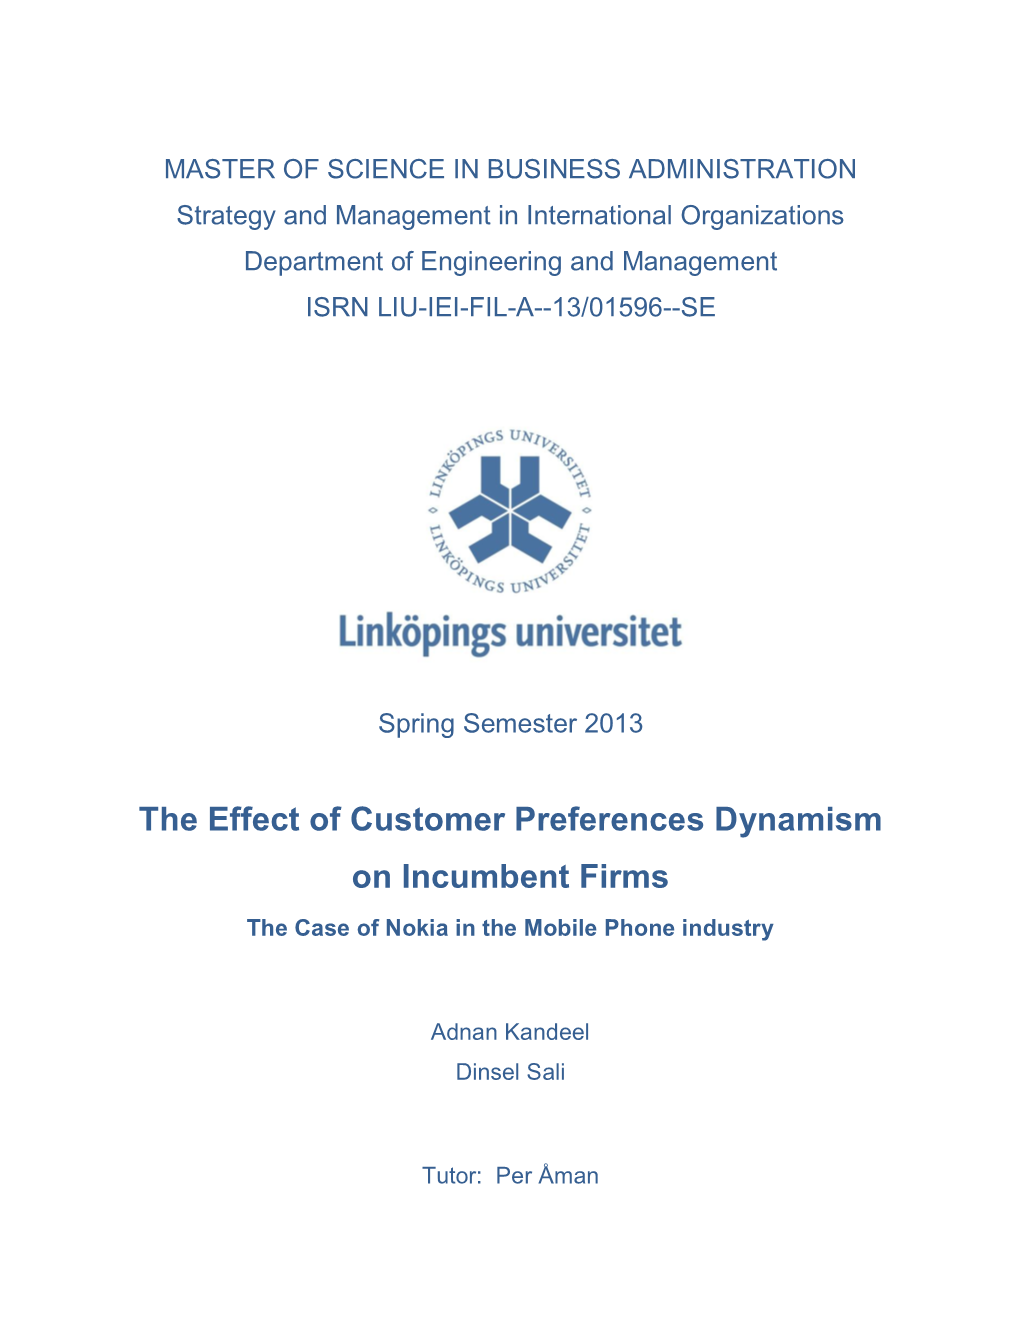 The Effect of Customer Preferences Dynamism on Incumbent Firms the Case of Nokia in the Mobile Phone Industry